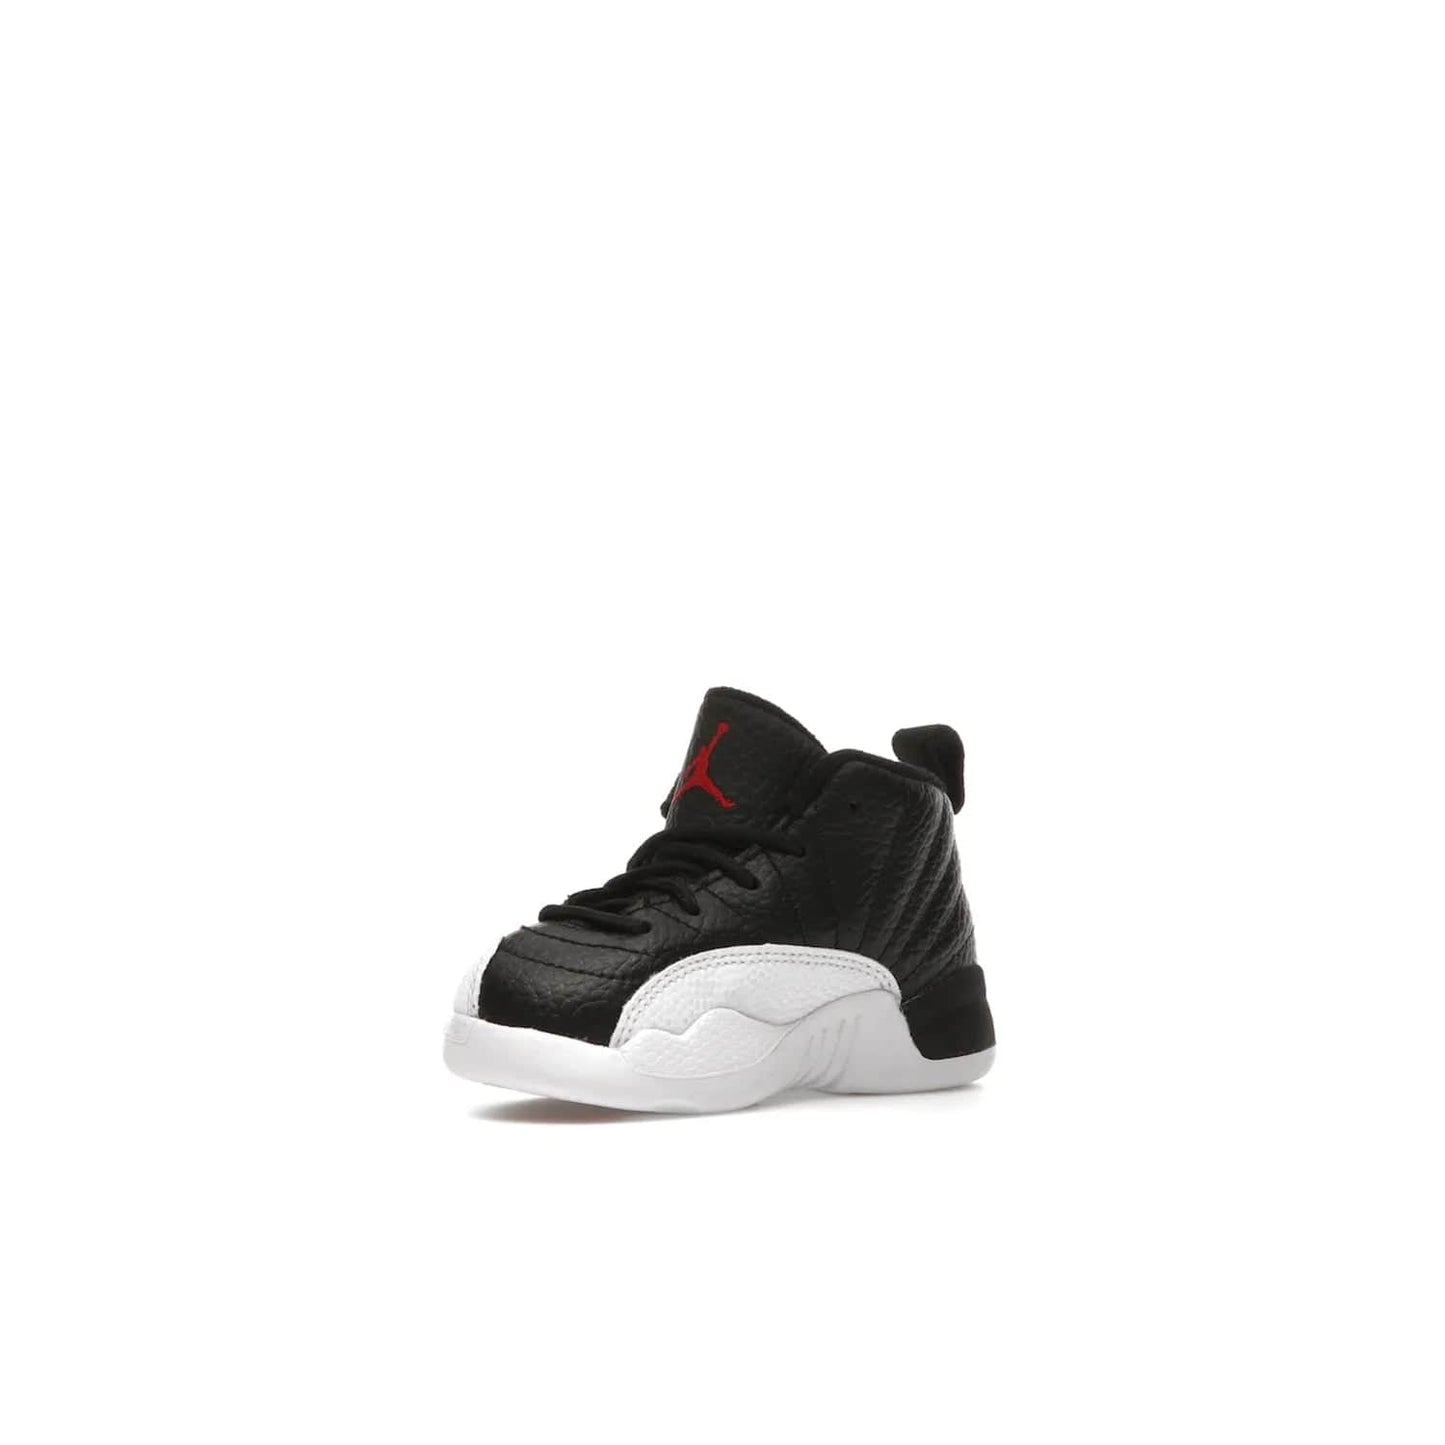 Jordan 12 Retro Playoffs (2022) (TD) - Image 15 - Only at www.BallersClubKickz.com - Stay stylish with the Air Jordan 12 Retro Playoffs 2022 (TD) toddler shoe. All-black upper with red and white accents plus subtle gold details. Bright white midsole and sole. Perfect for any outing or special event.